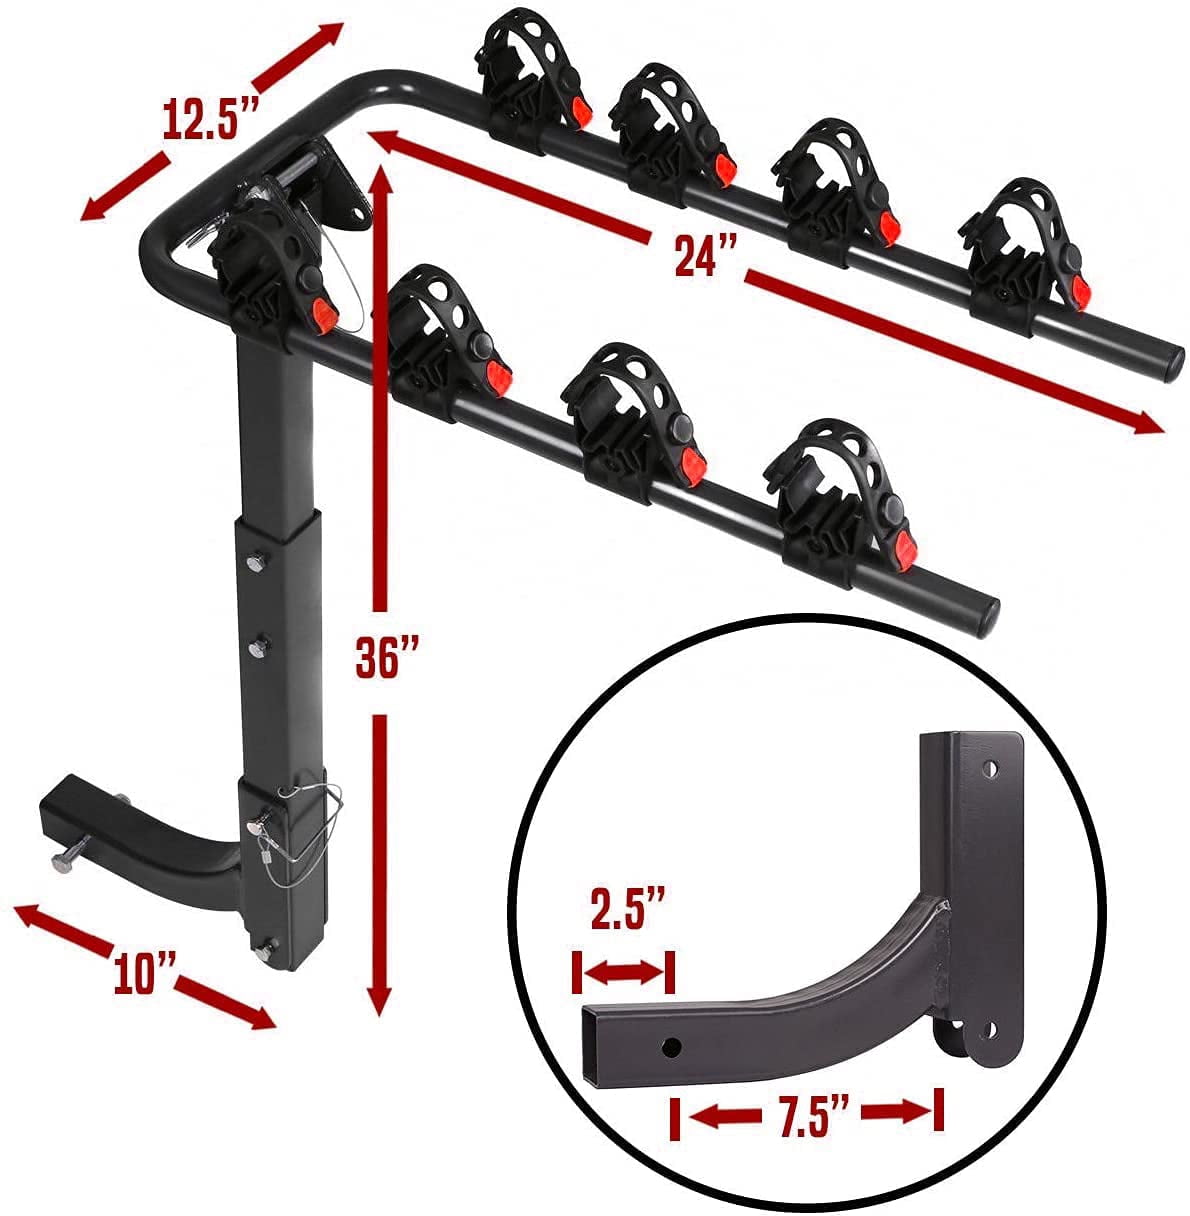 Fits 2 Receivers ONLY Swing Away Hitch Mount Bike Rack for 2 Bikes 